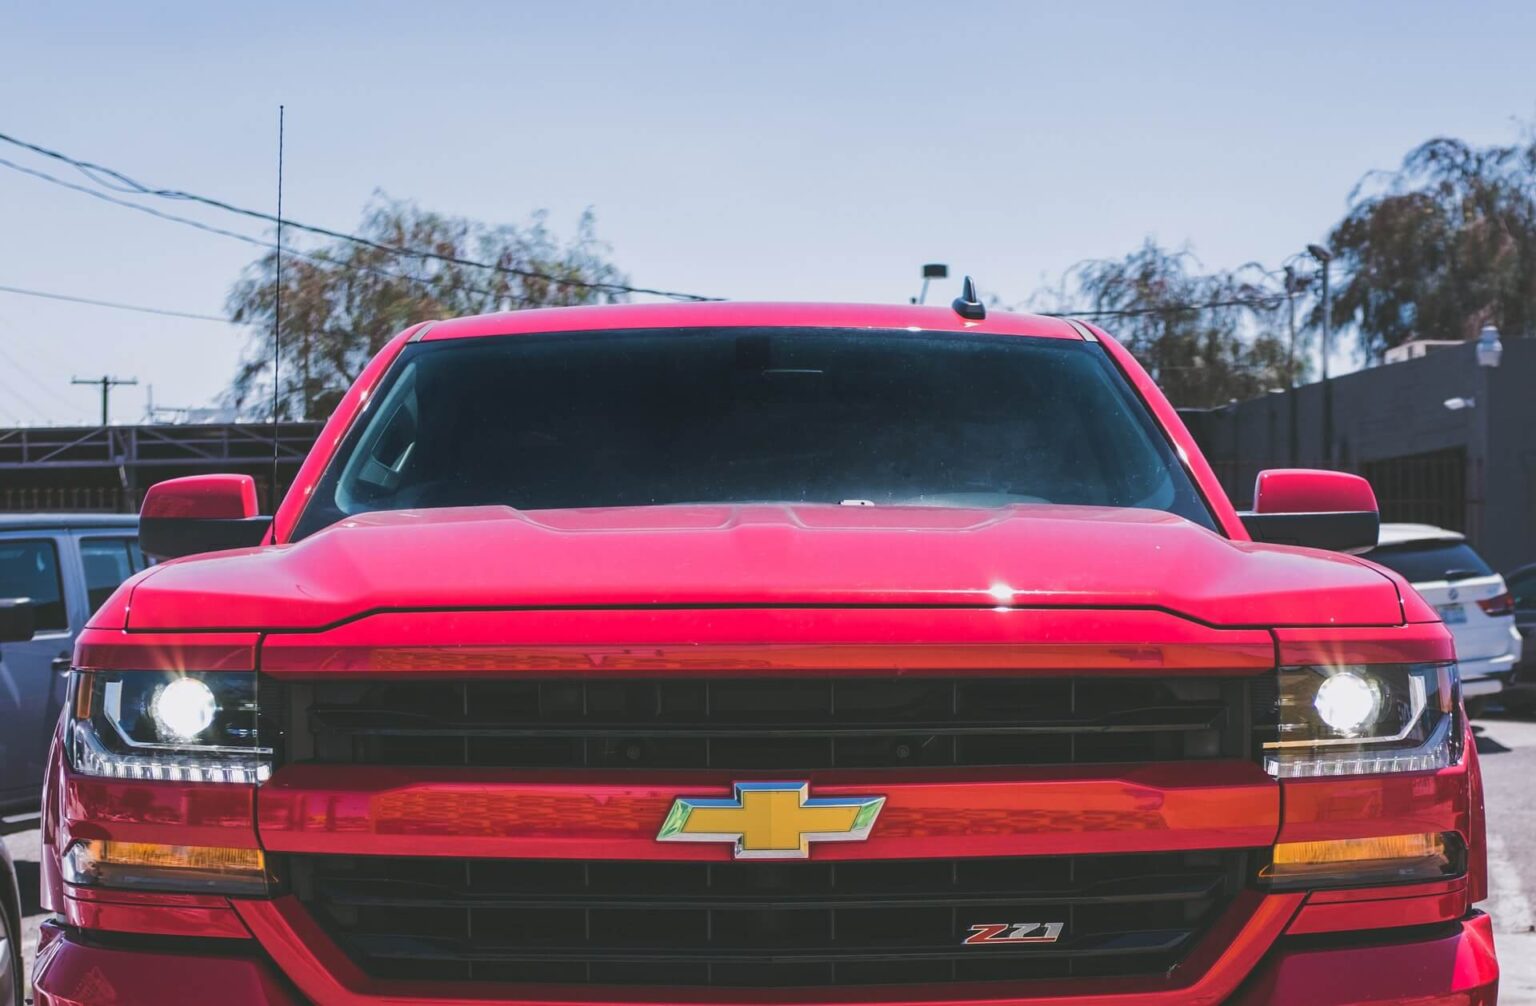 Chevy Silverado Driving Modes Explained 2020+ Models